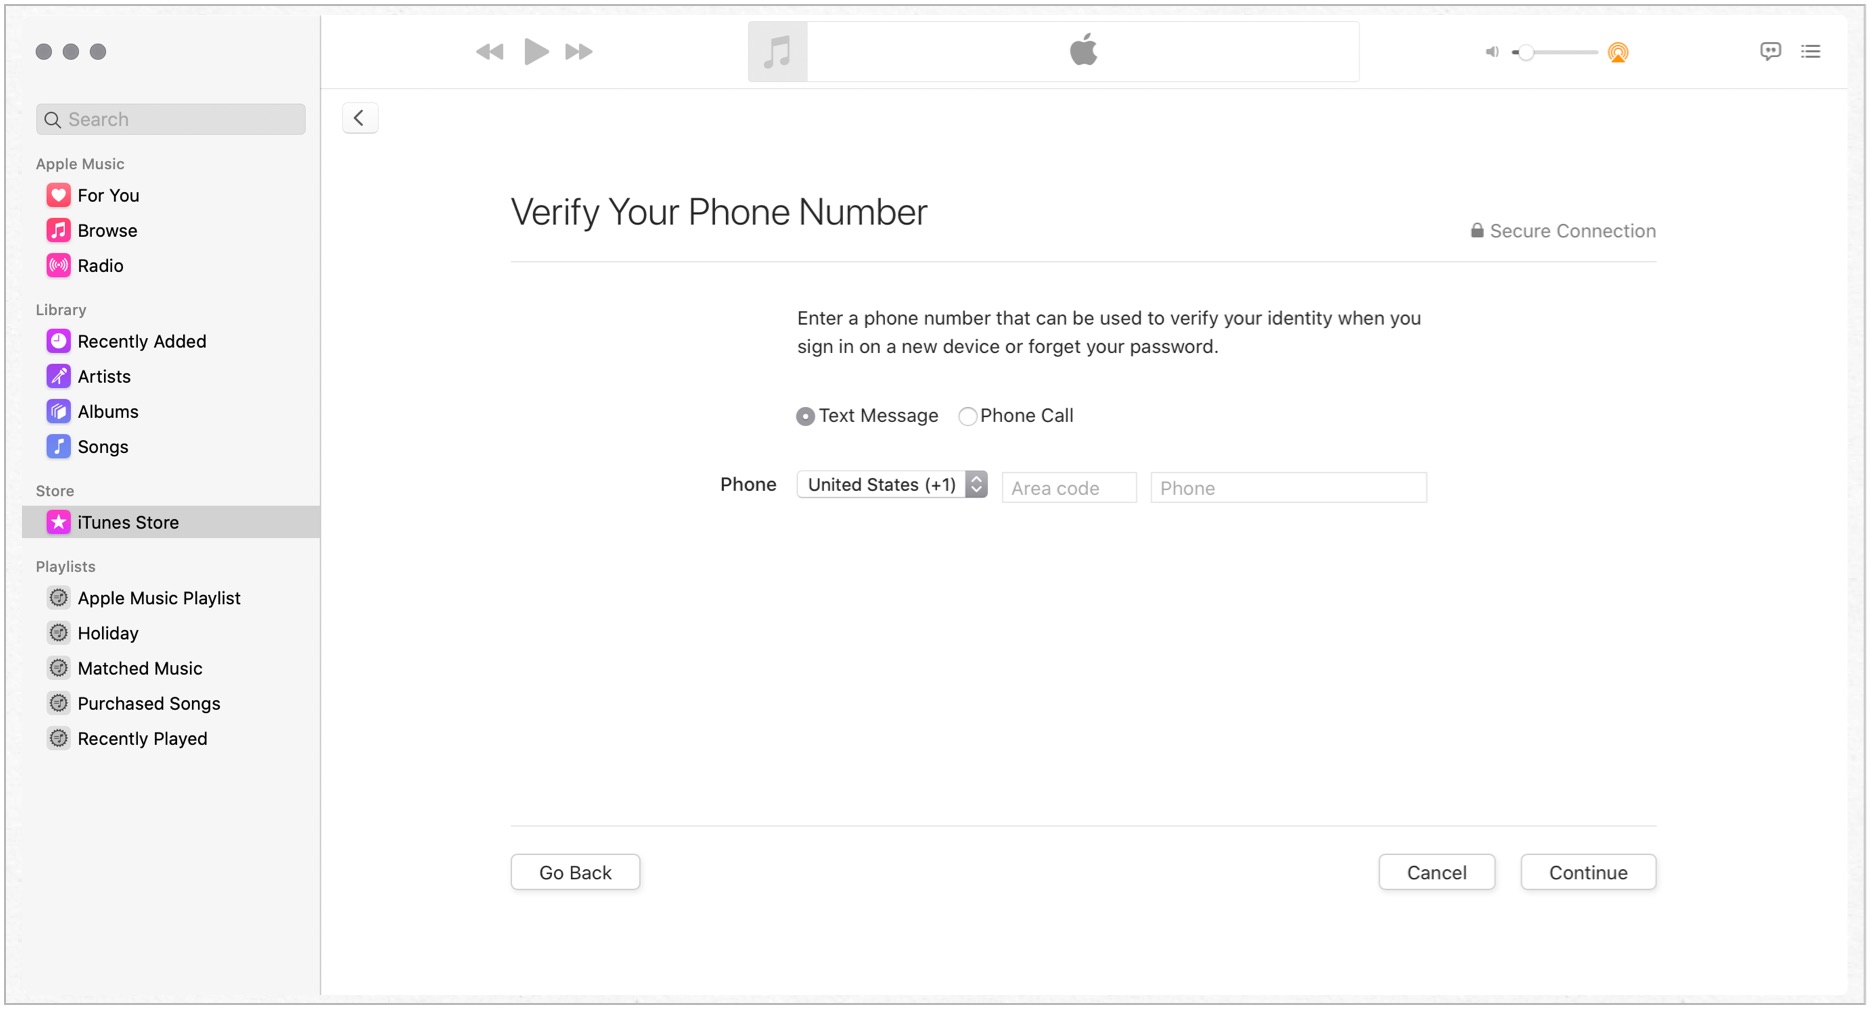 Choose Text Message or Phone Call as your verification option, add your phone number and then click Continue.